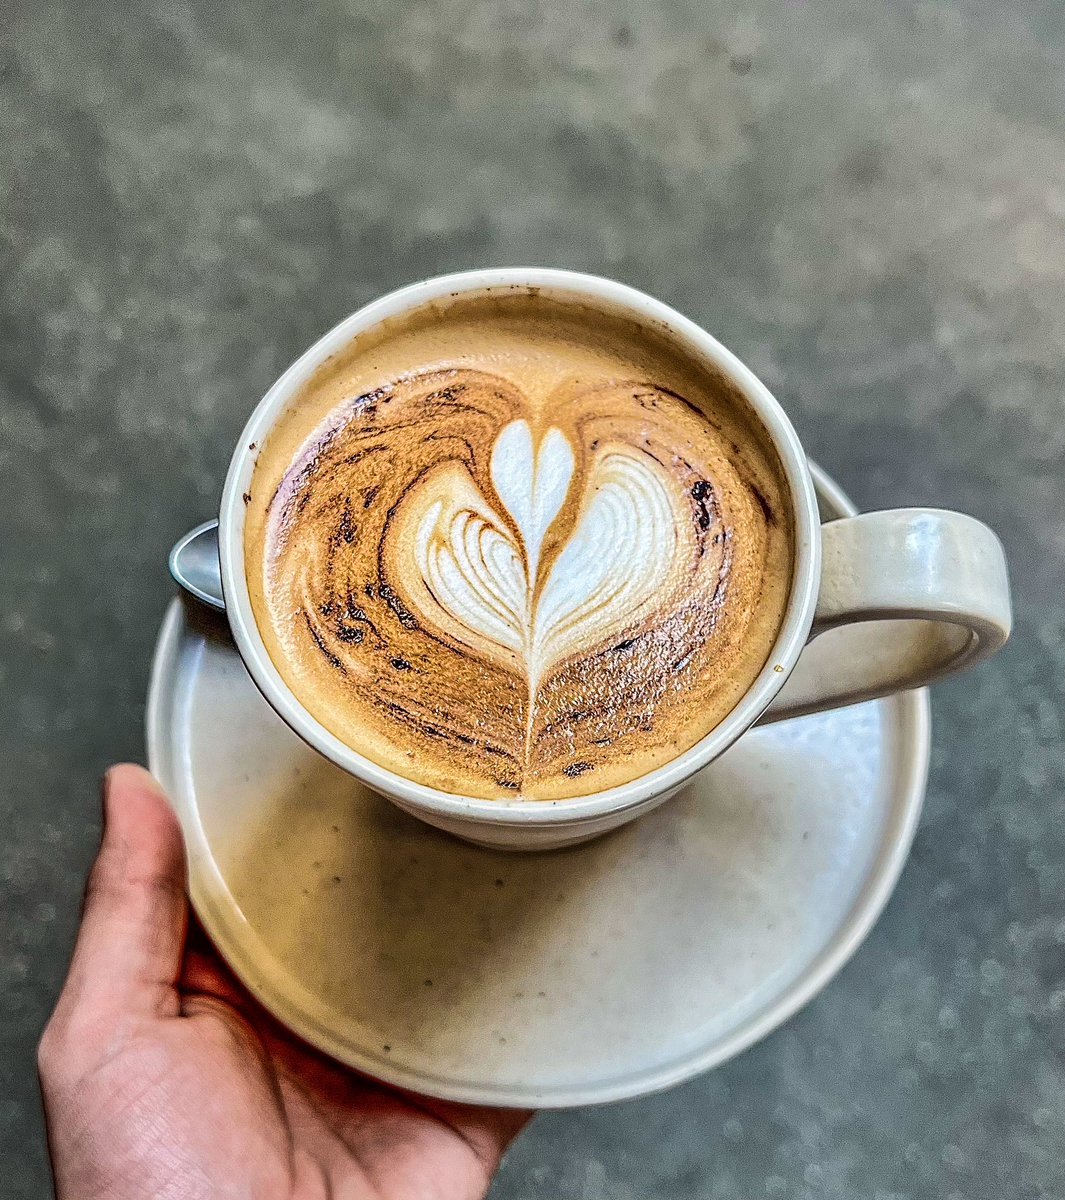 Starting Sunday morning with The Point coffee, a blend of Costa Rican & Ugandan beans 😋 🫘 ☕️ 

Croydecoffee.com 

#croydecoffee #coffeeseller #croydetea #croydeteas #teaseller #teatime #teabythesea #tealover 
#croyde #croydebay #coffeetime #coffee #mobilecoffeetruck